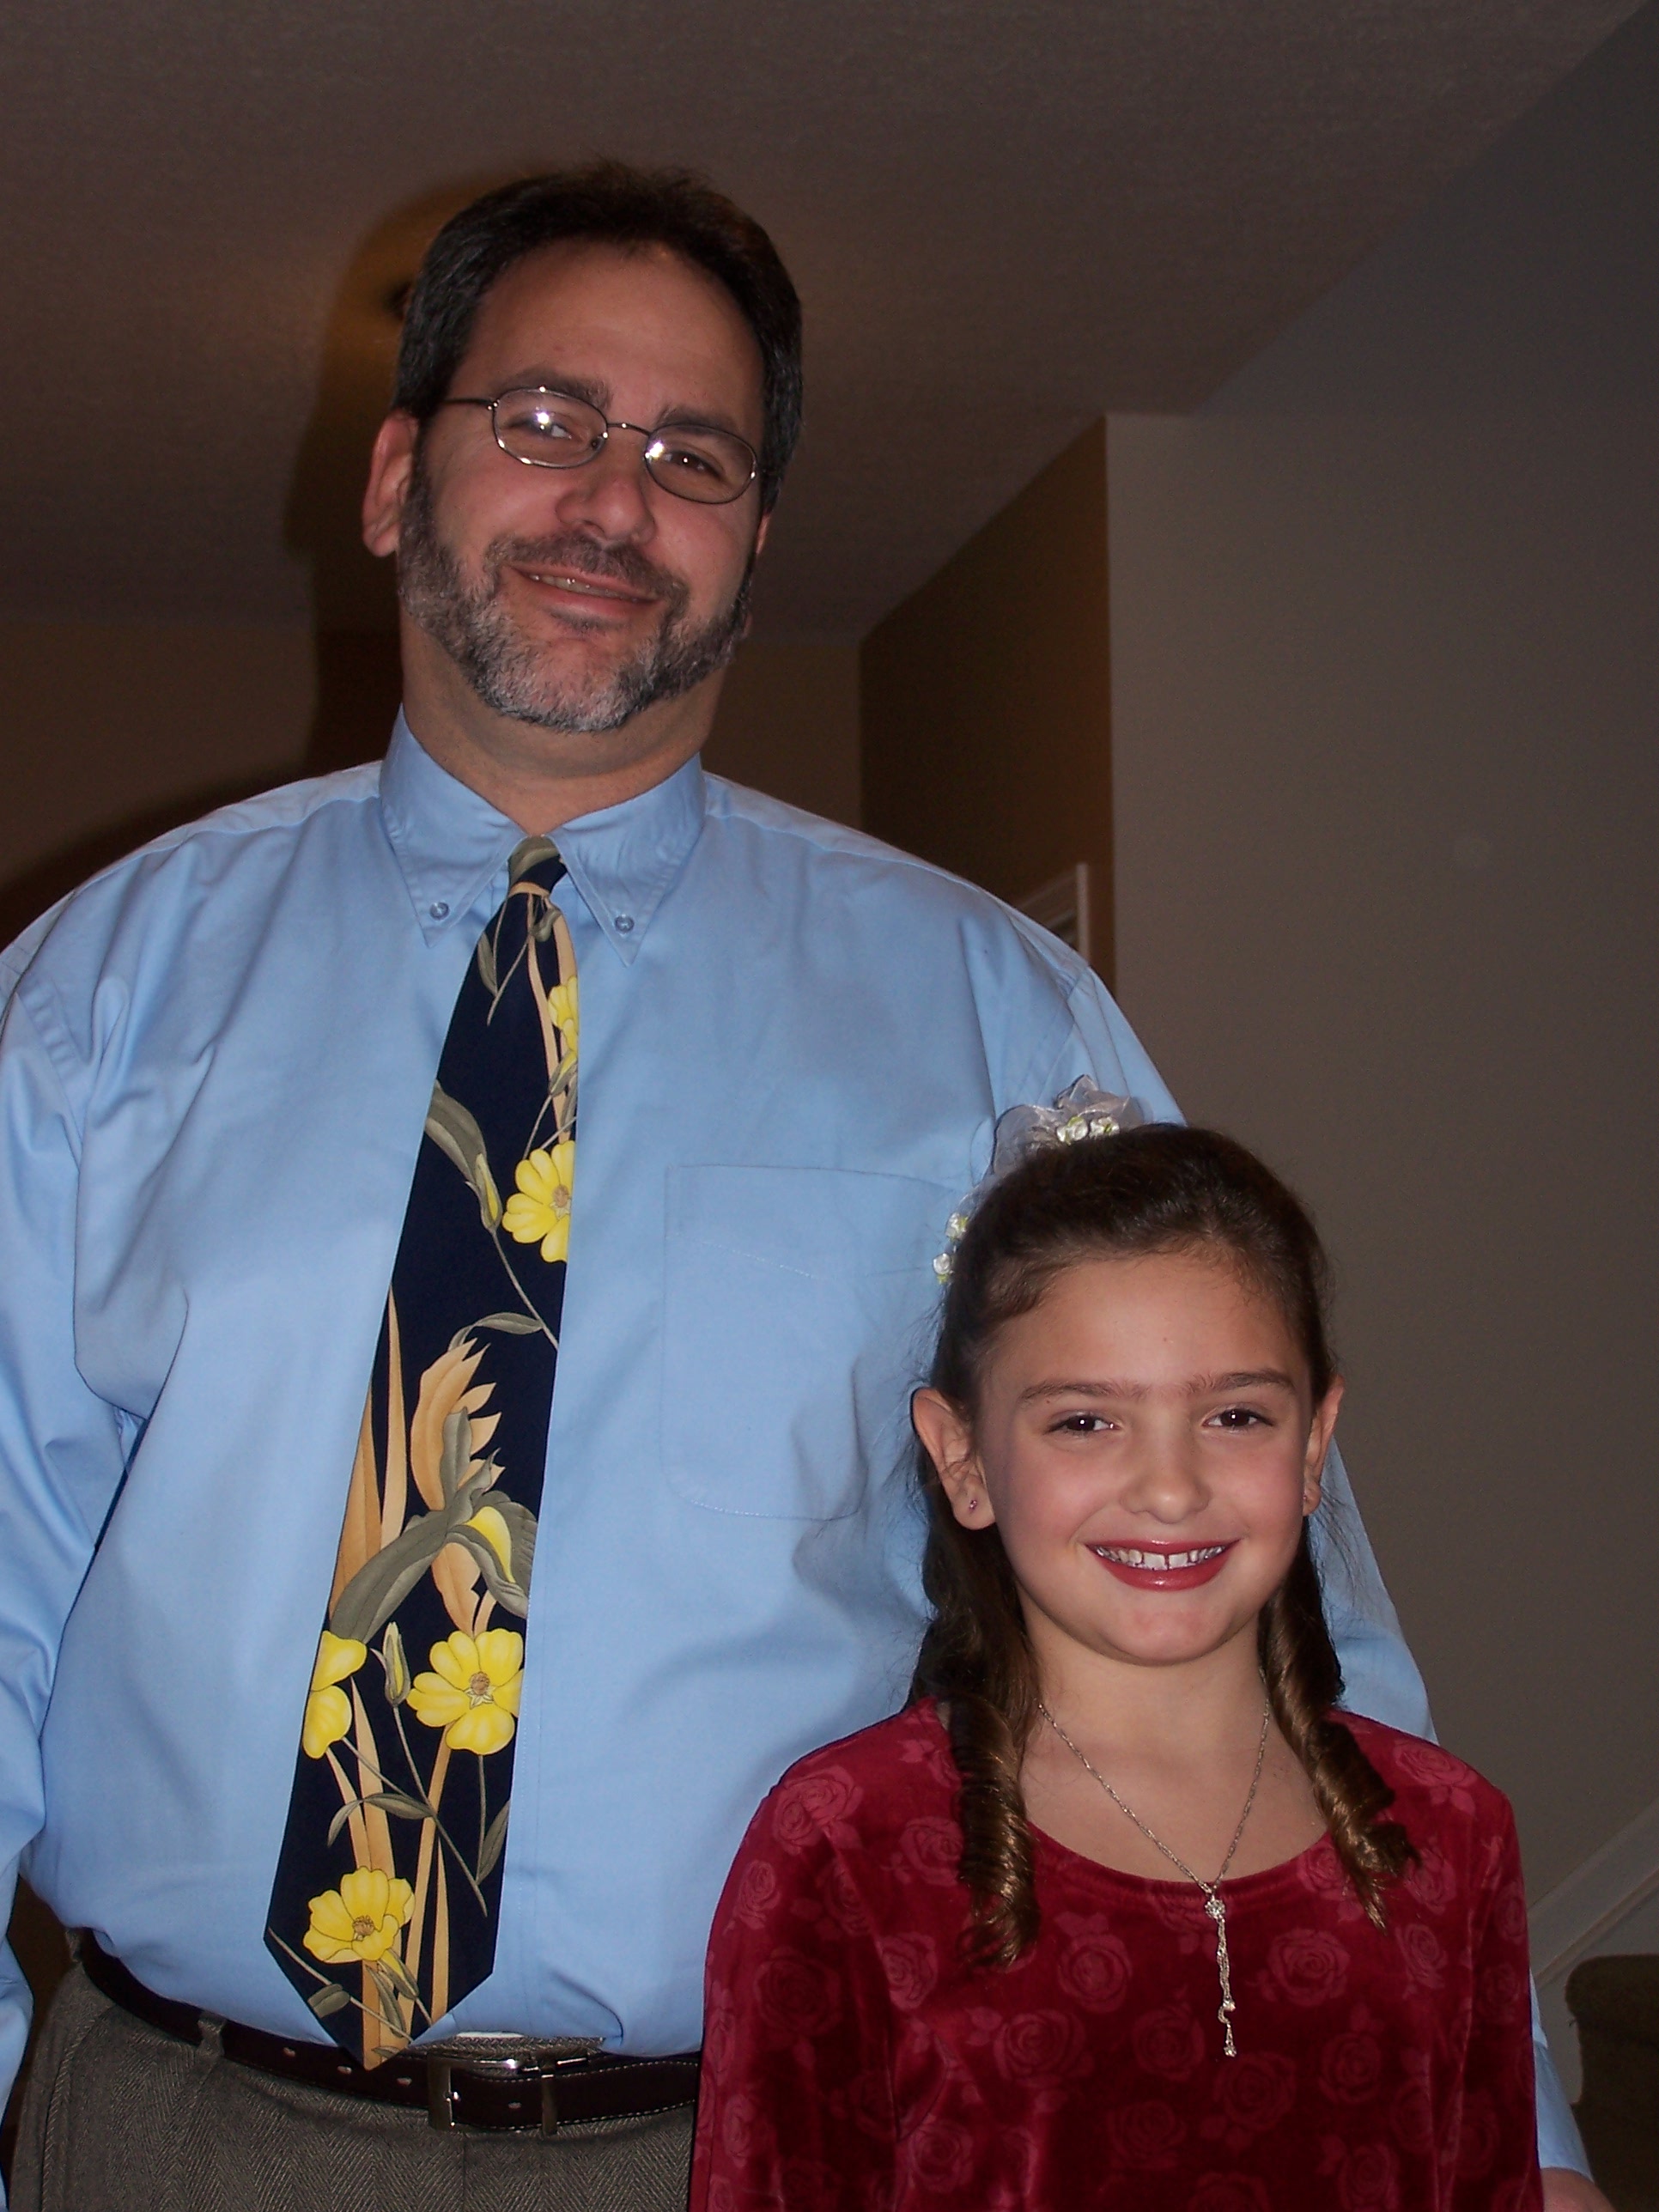 father daughter dance 006.jpg